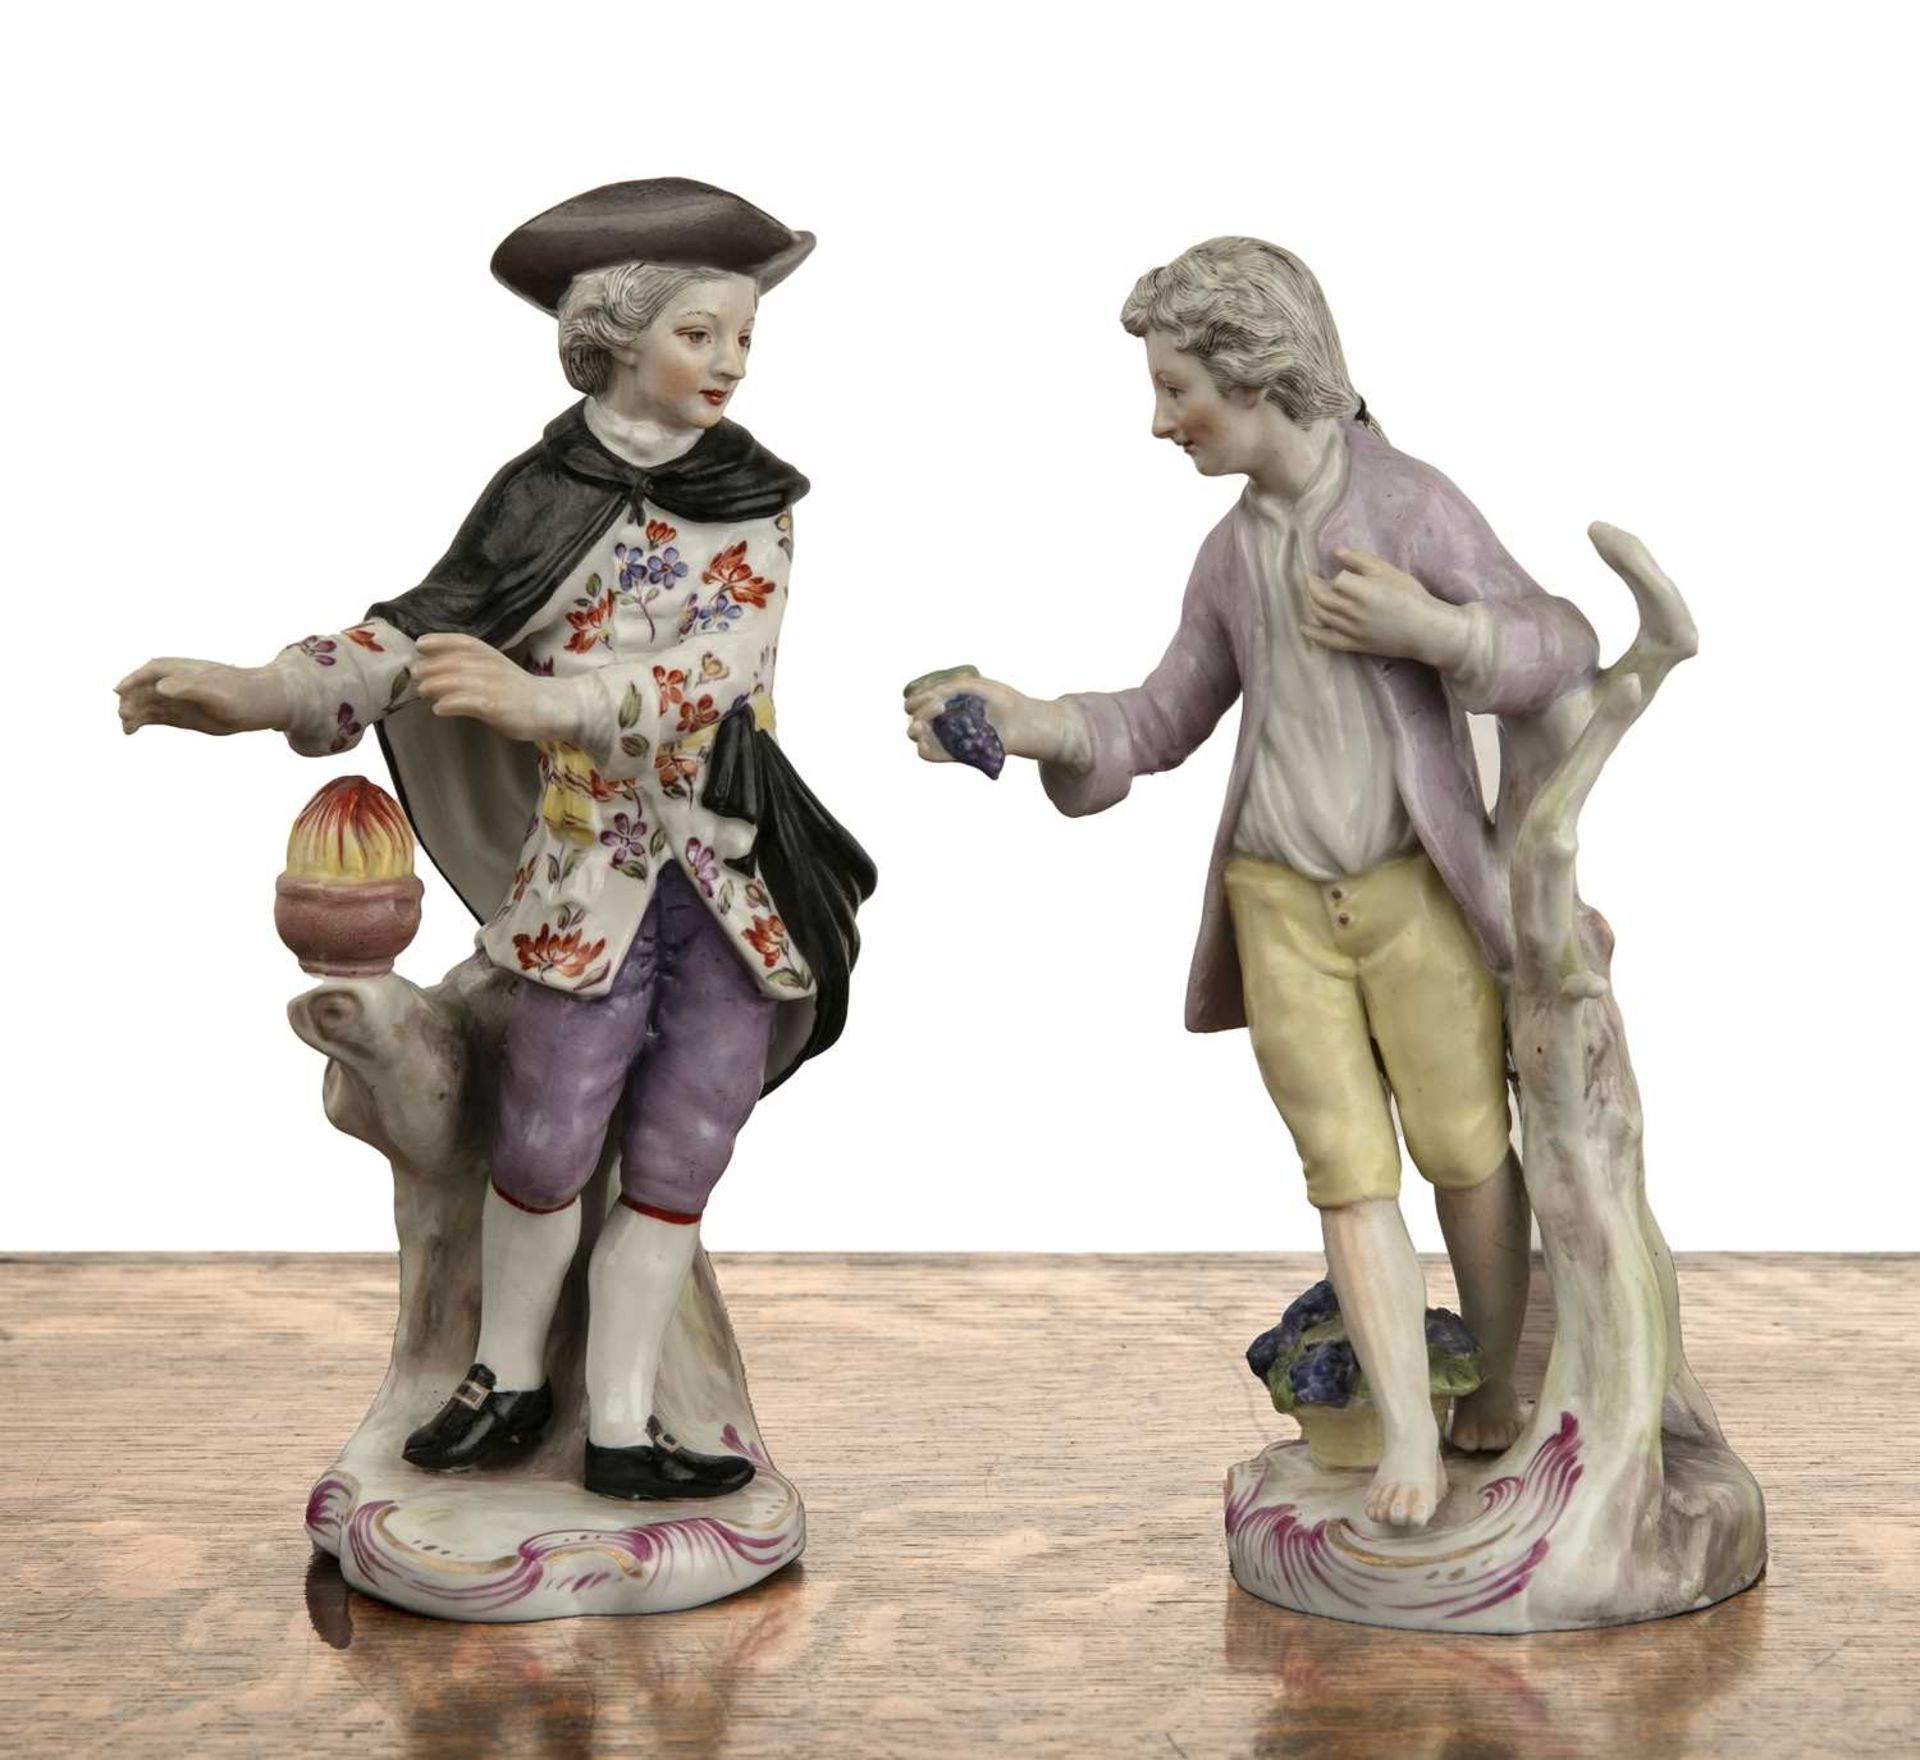 Pair of Continental porcelain figures one of a gentleman wearing a floral waistcoat, the other